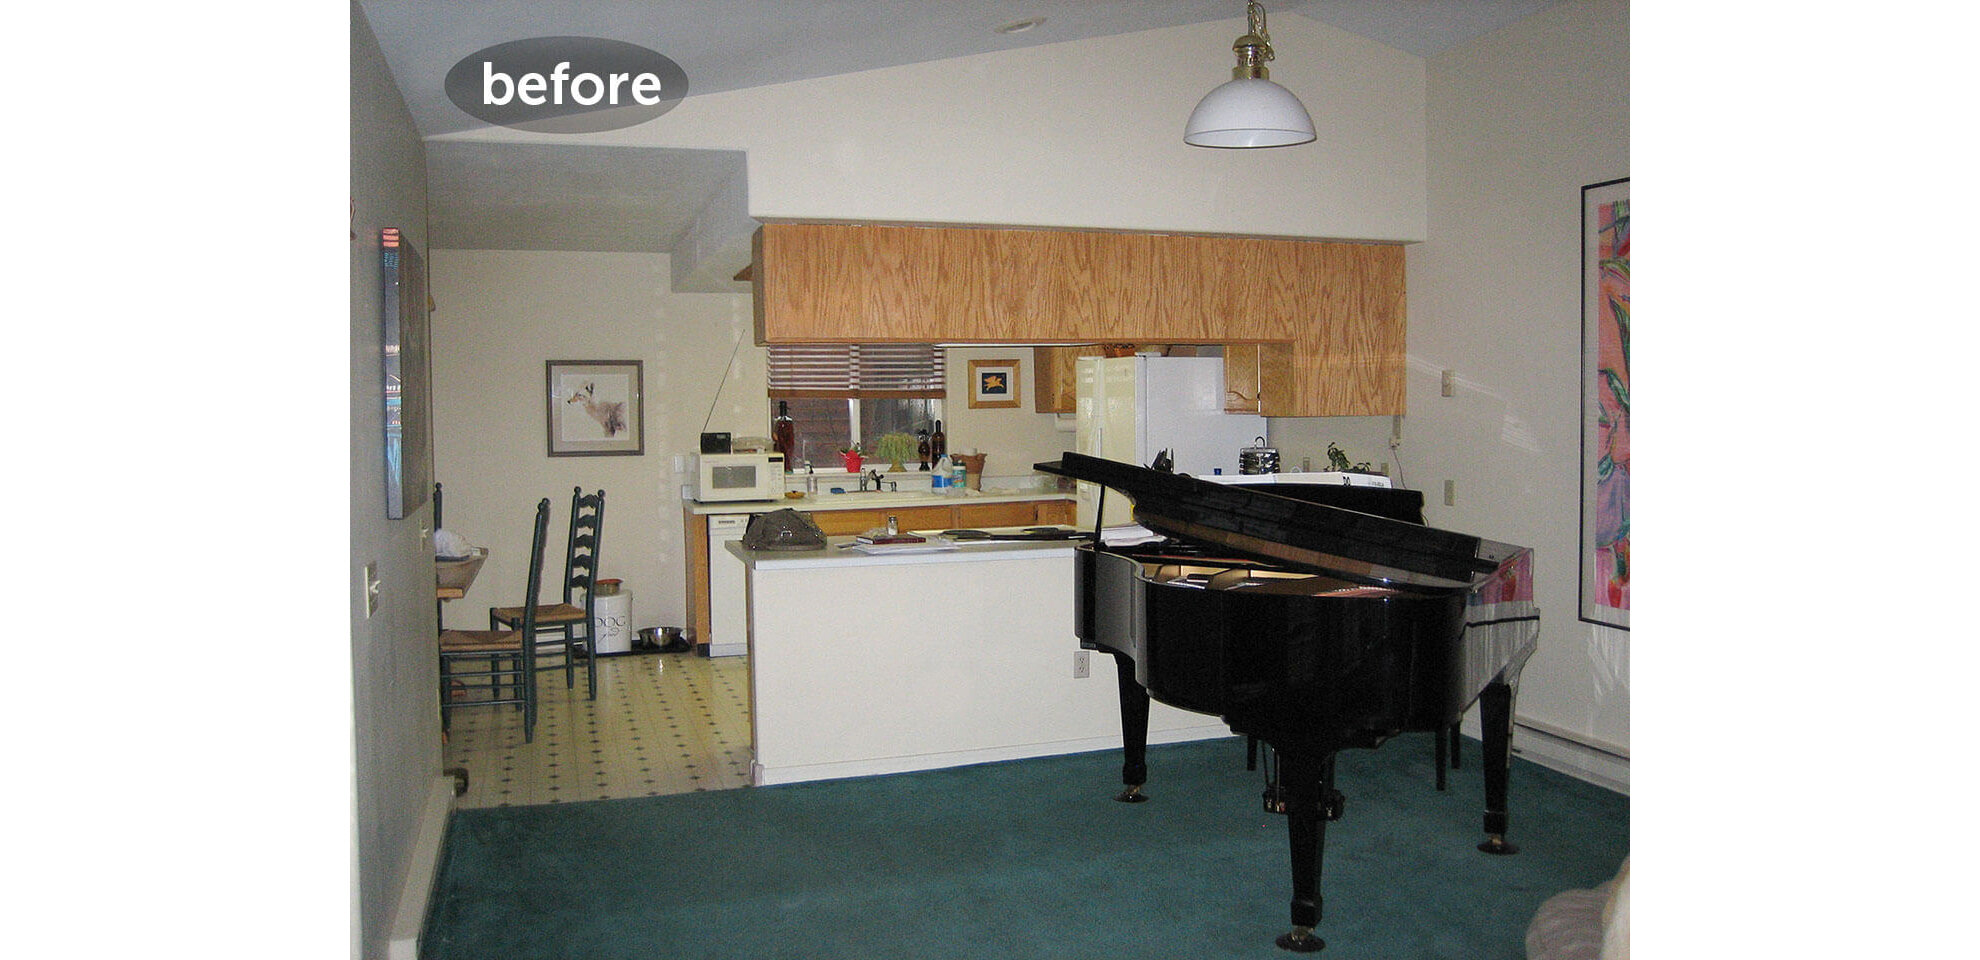 Before remodeling kitchen view with piano 